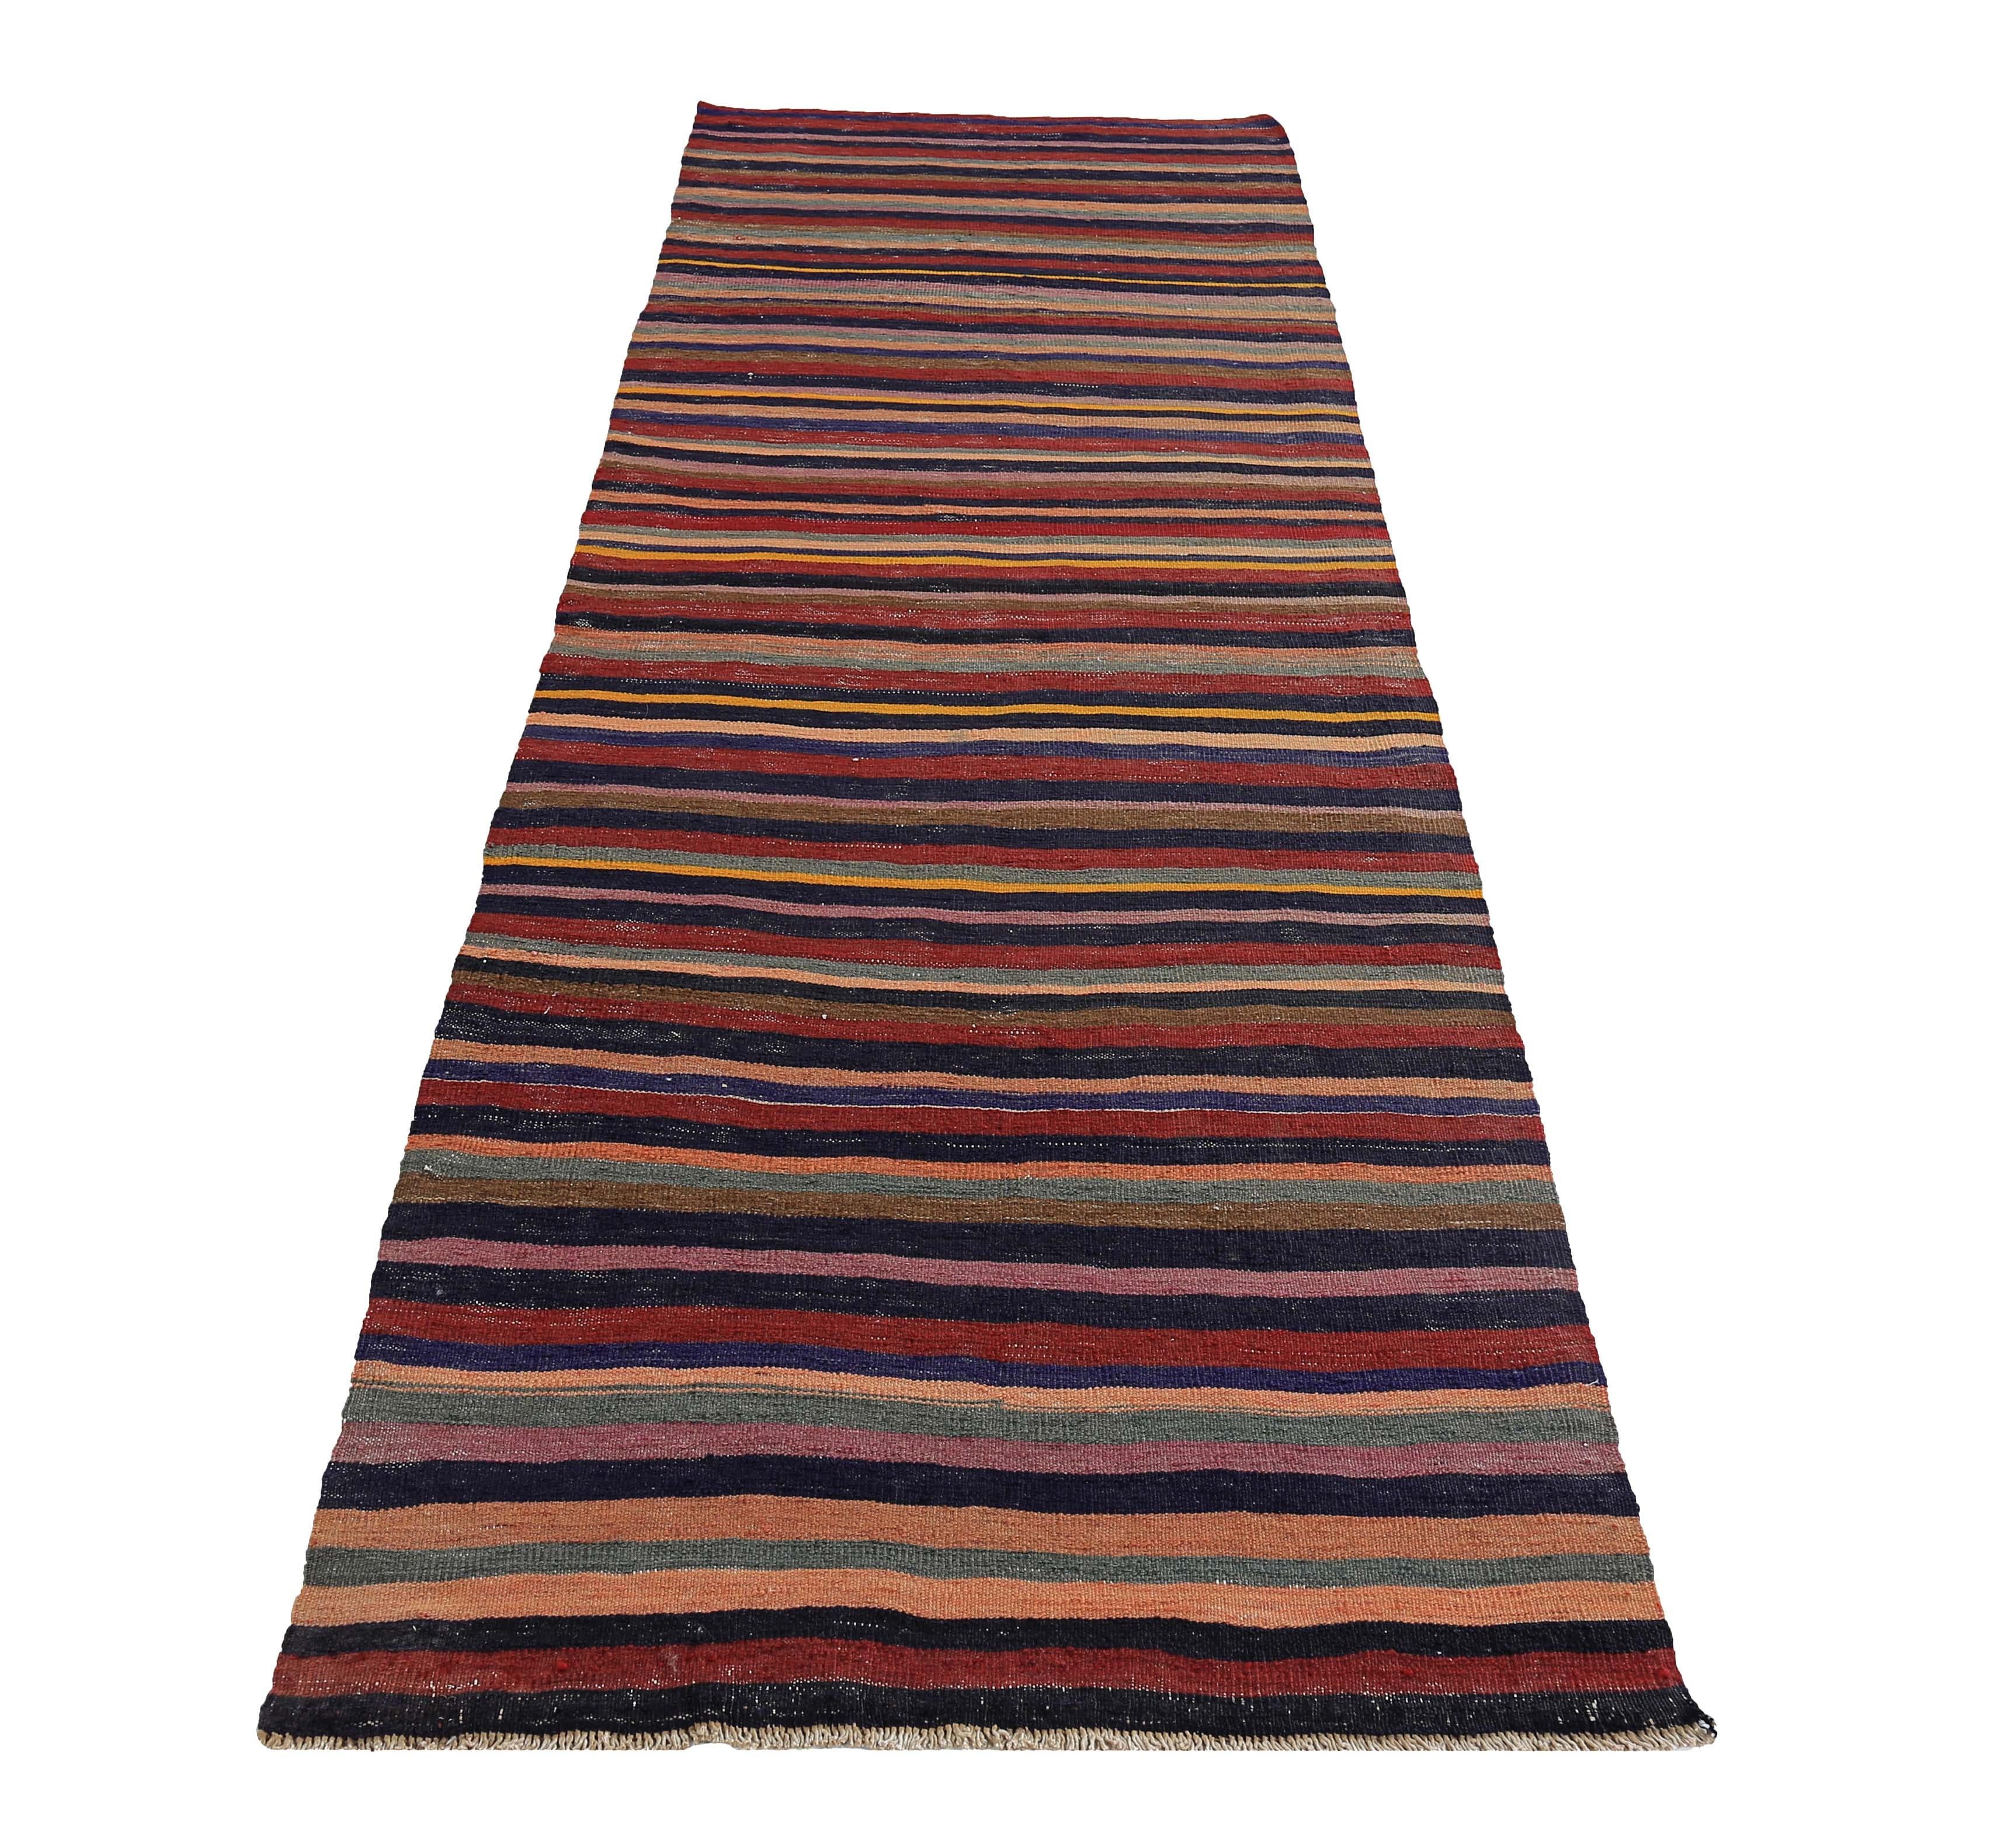 Turkish rug handwoven from the finest sheep’s wool and colored with all-natural vegetable dyes that are safe for humans and pets. It’s a traditional Kilim flat-weave design featuring red, orange and blue stripes. It’s a stunning piece to get for